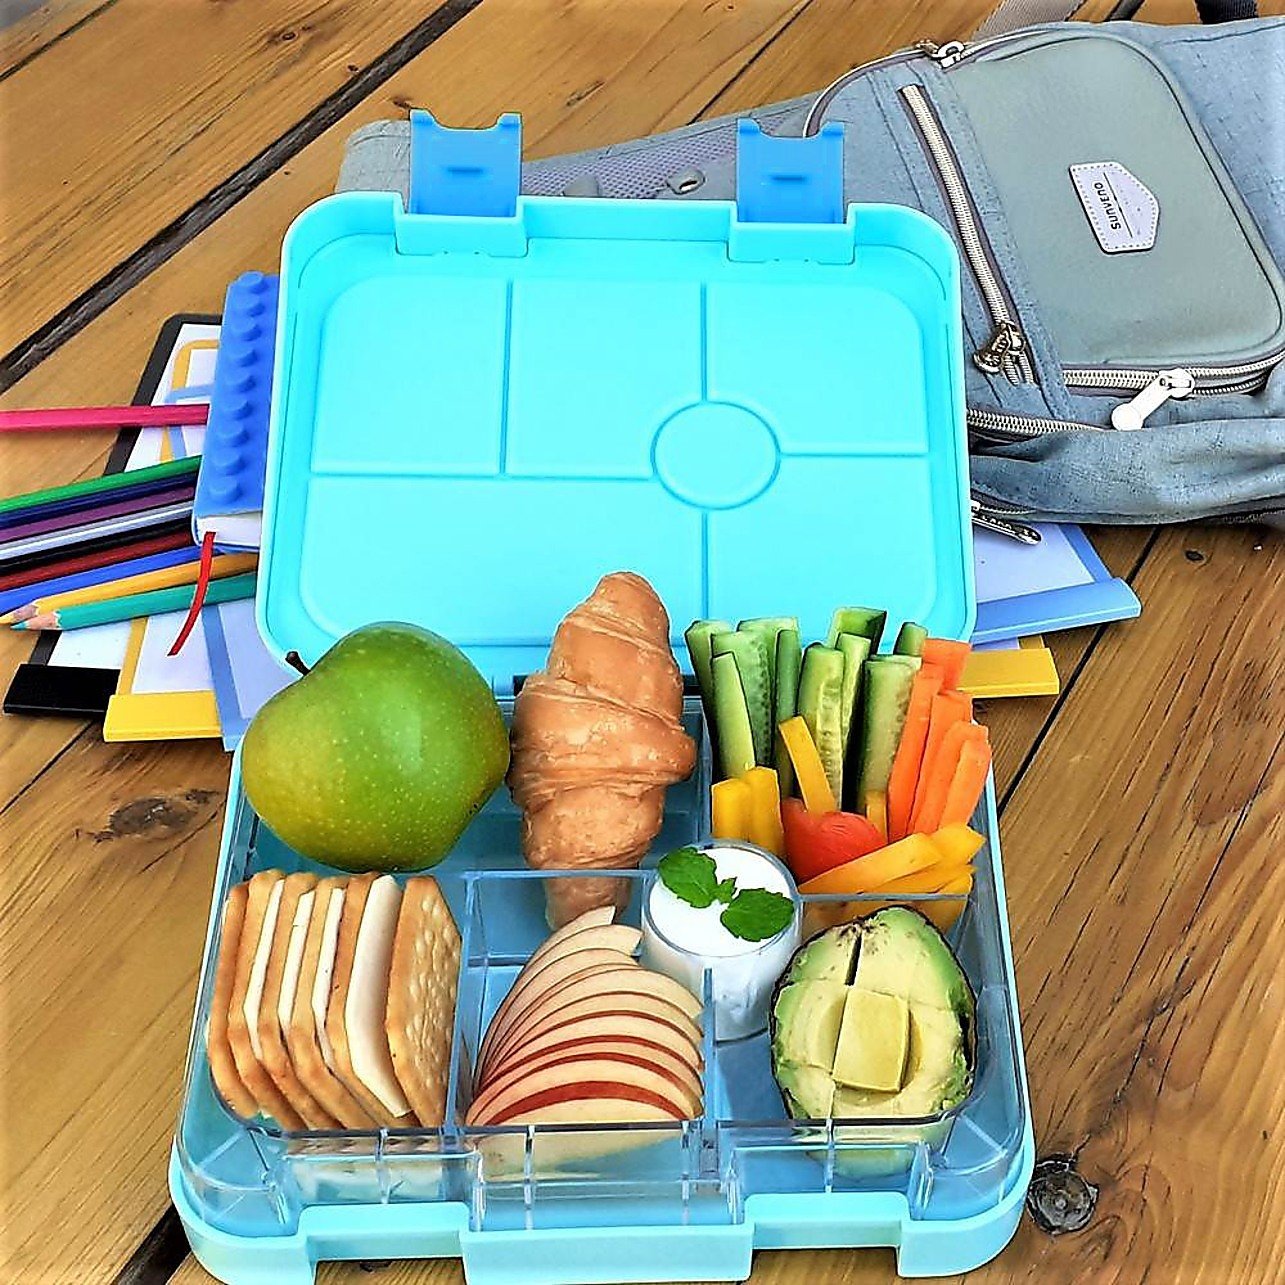 Bento Lunch Box Kids Leakproof Food Container School Picnic - Blue